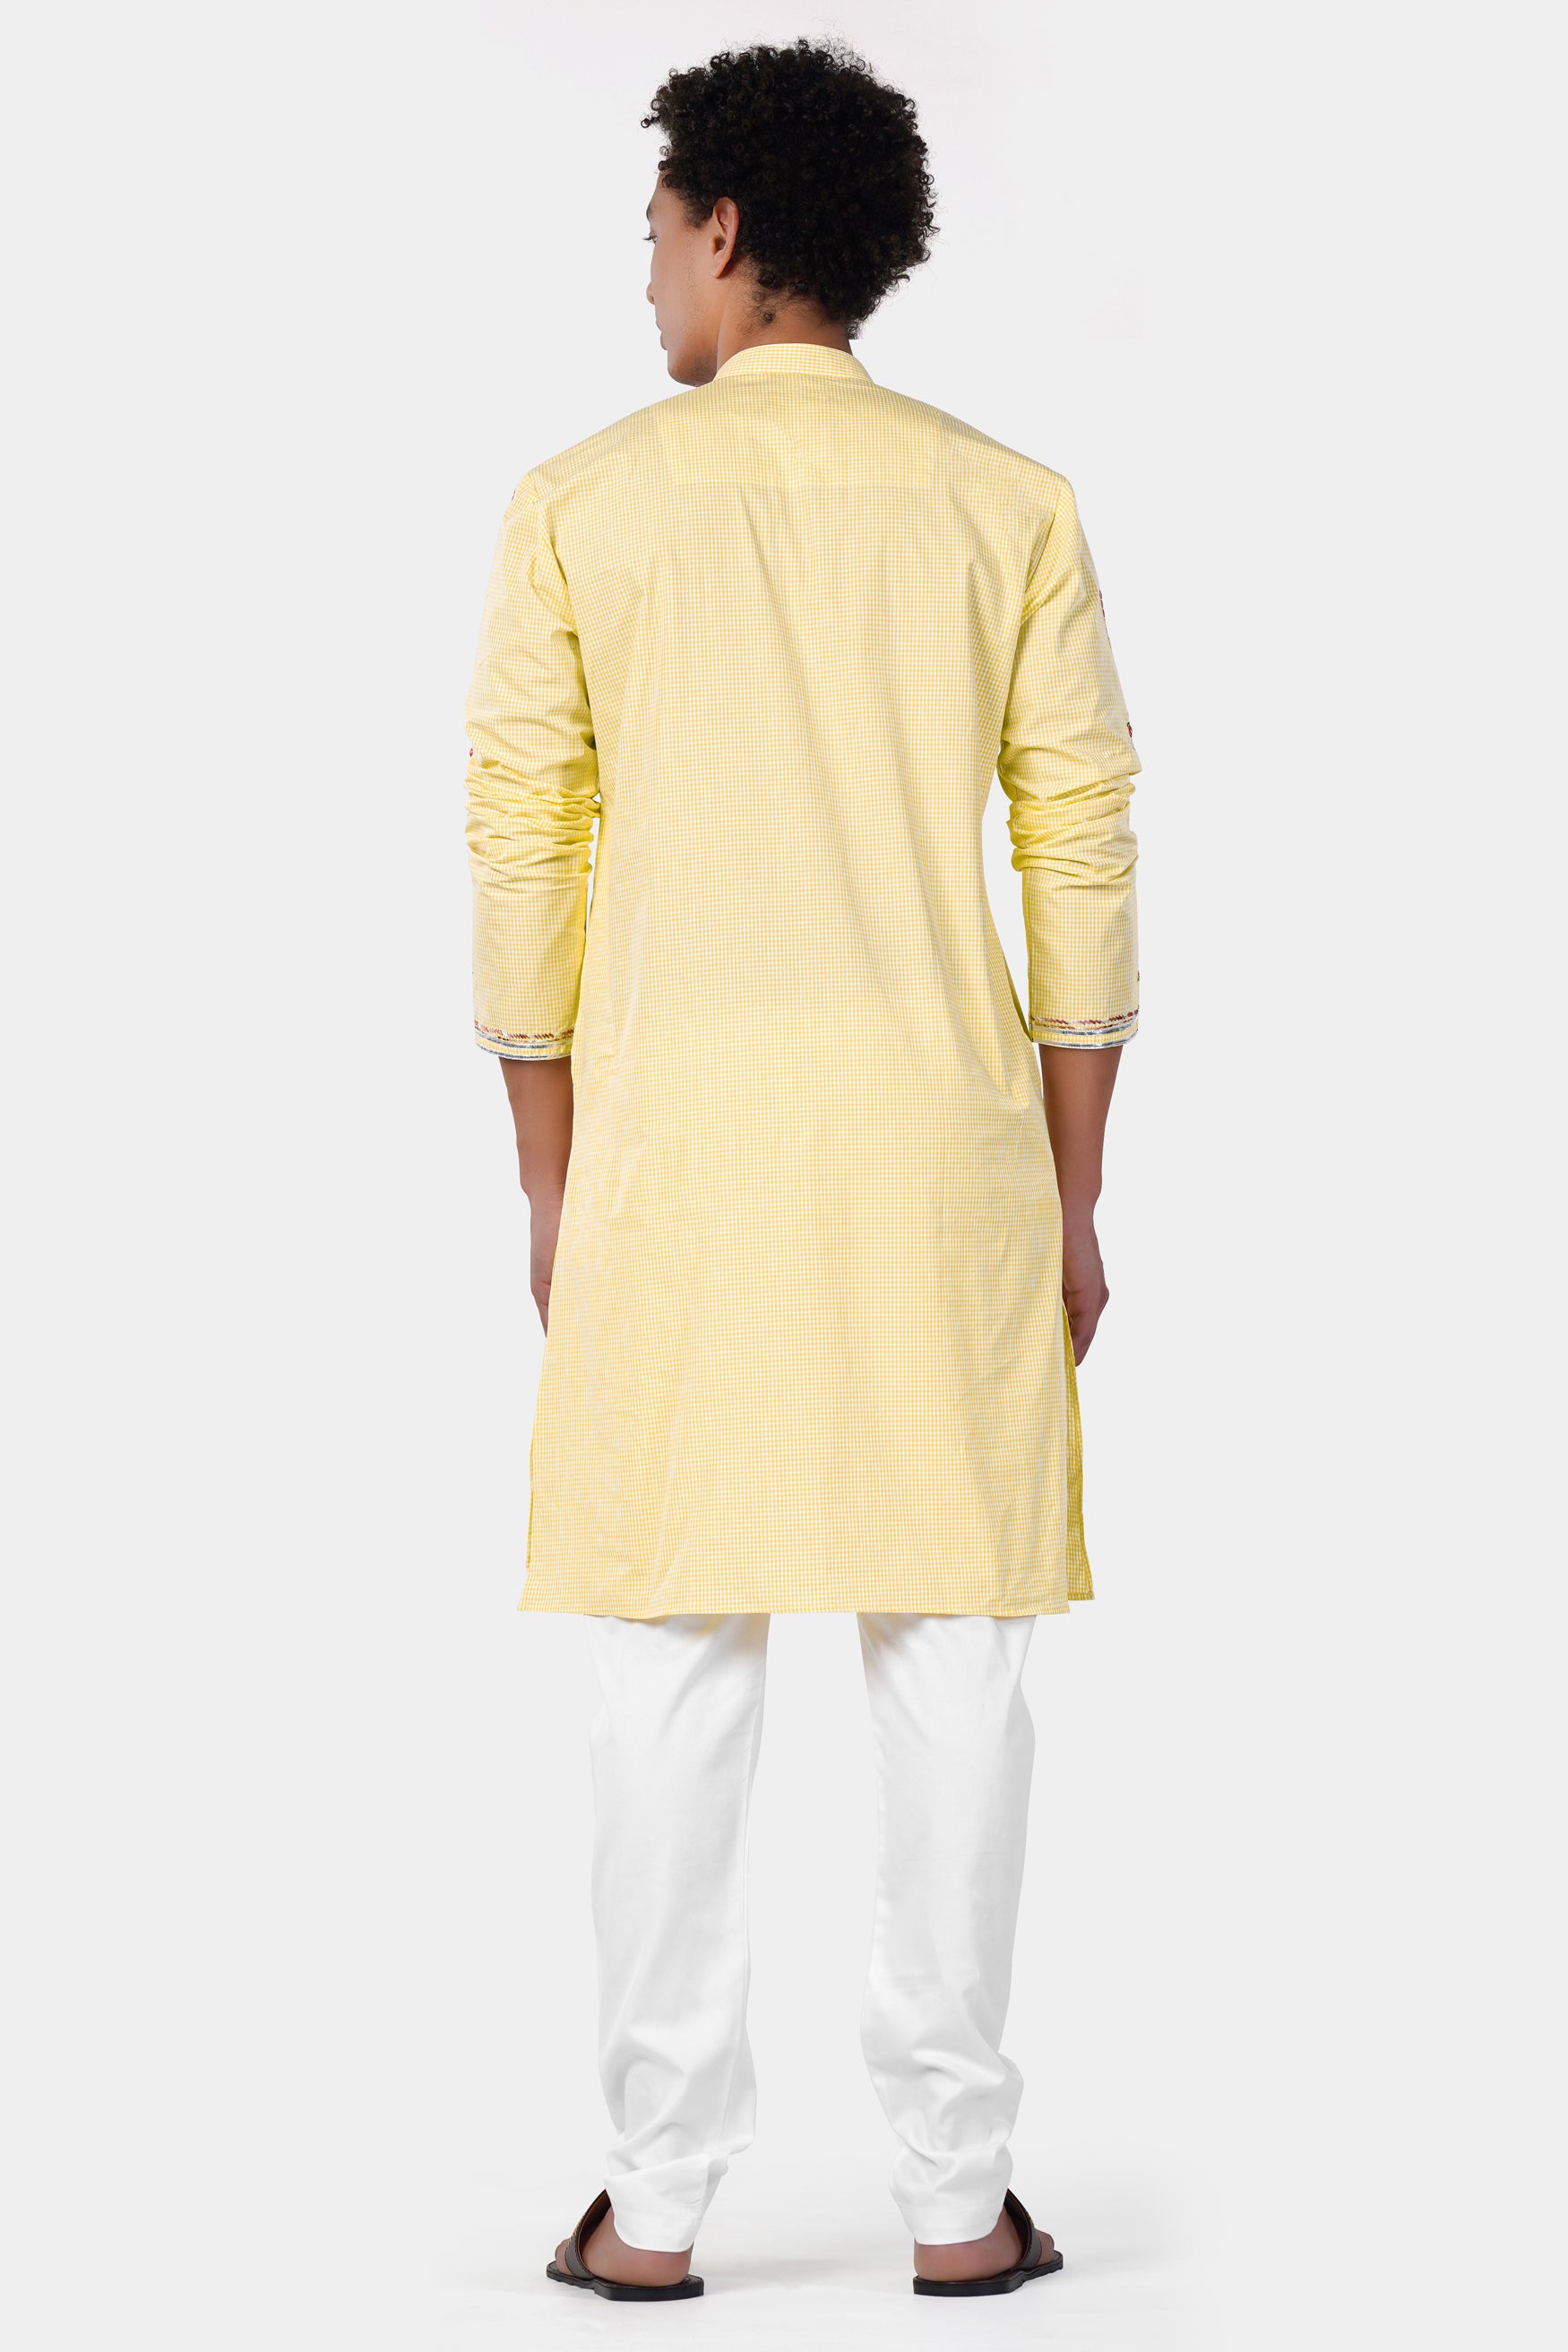 Brulee Yellow and White Gingham Checkered with Thread Embroidered and Mirror Work Premium Cotton Designer Kurta Set